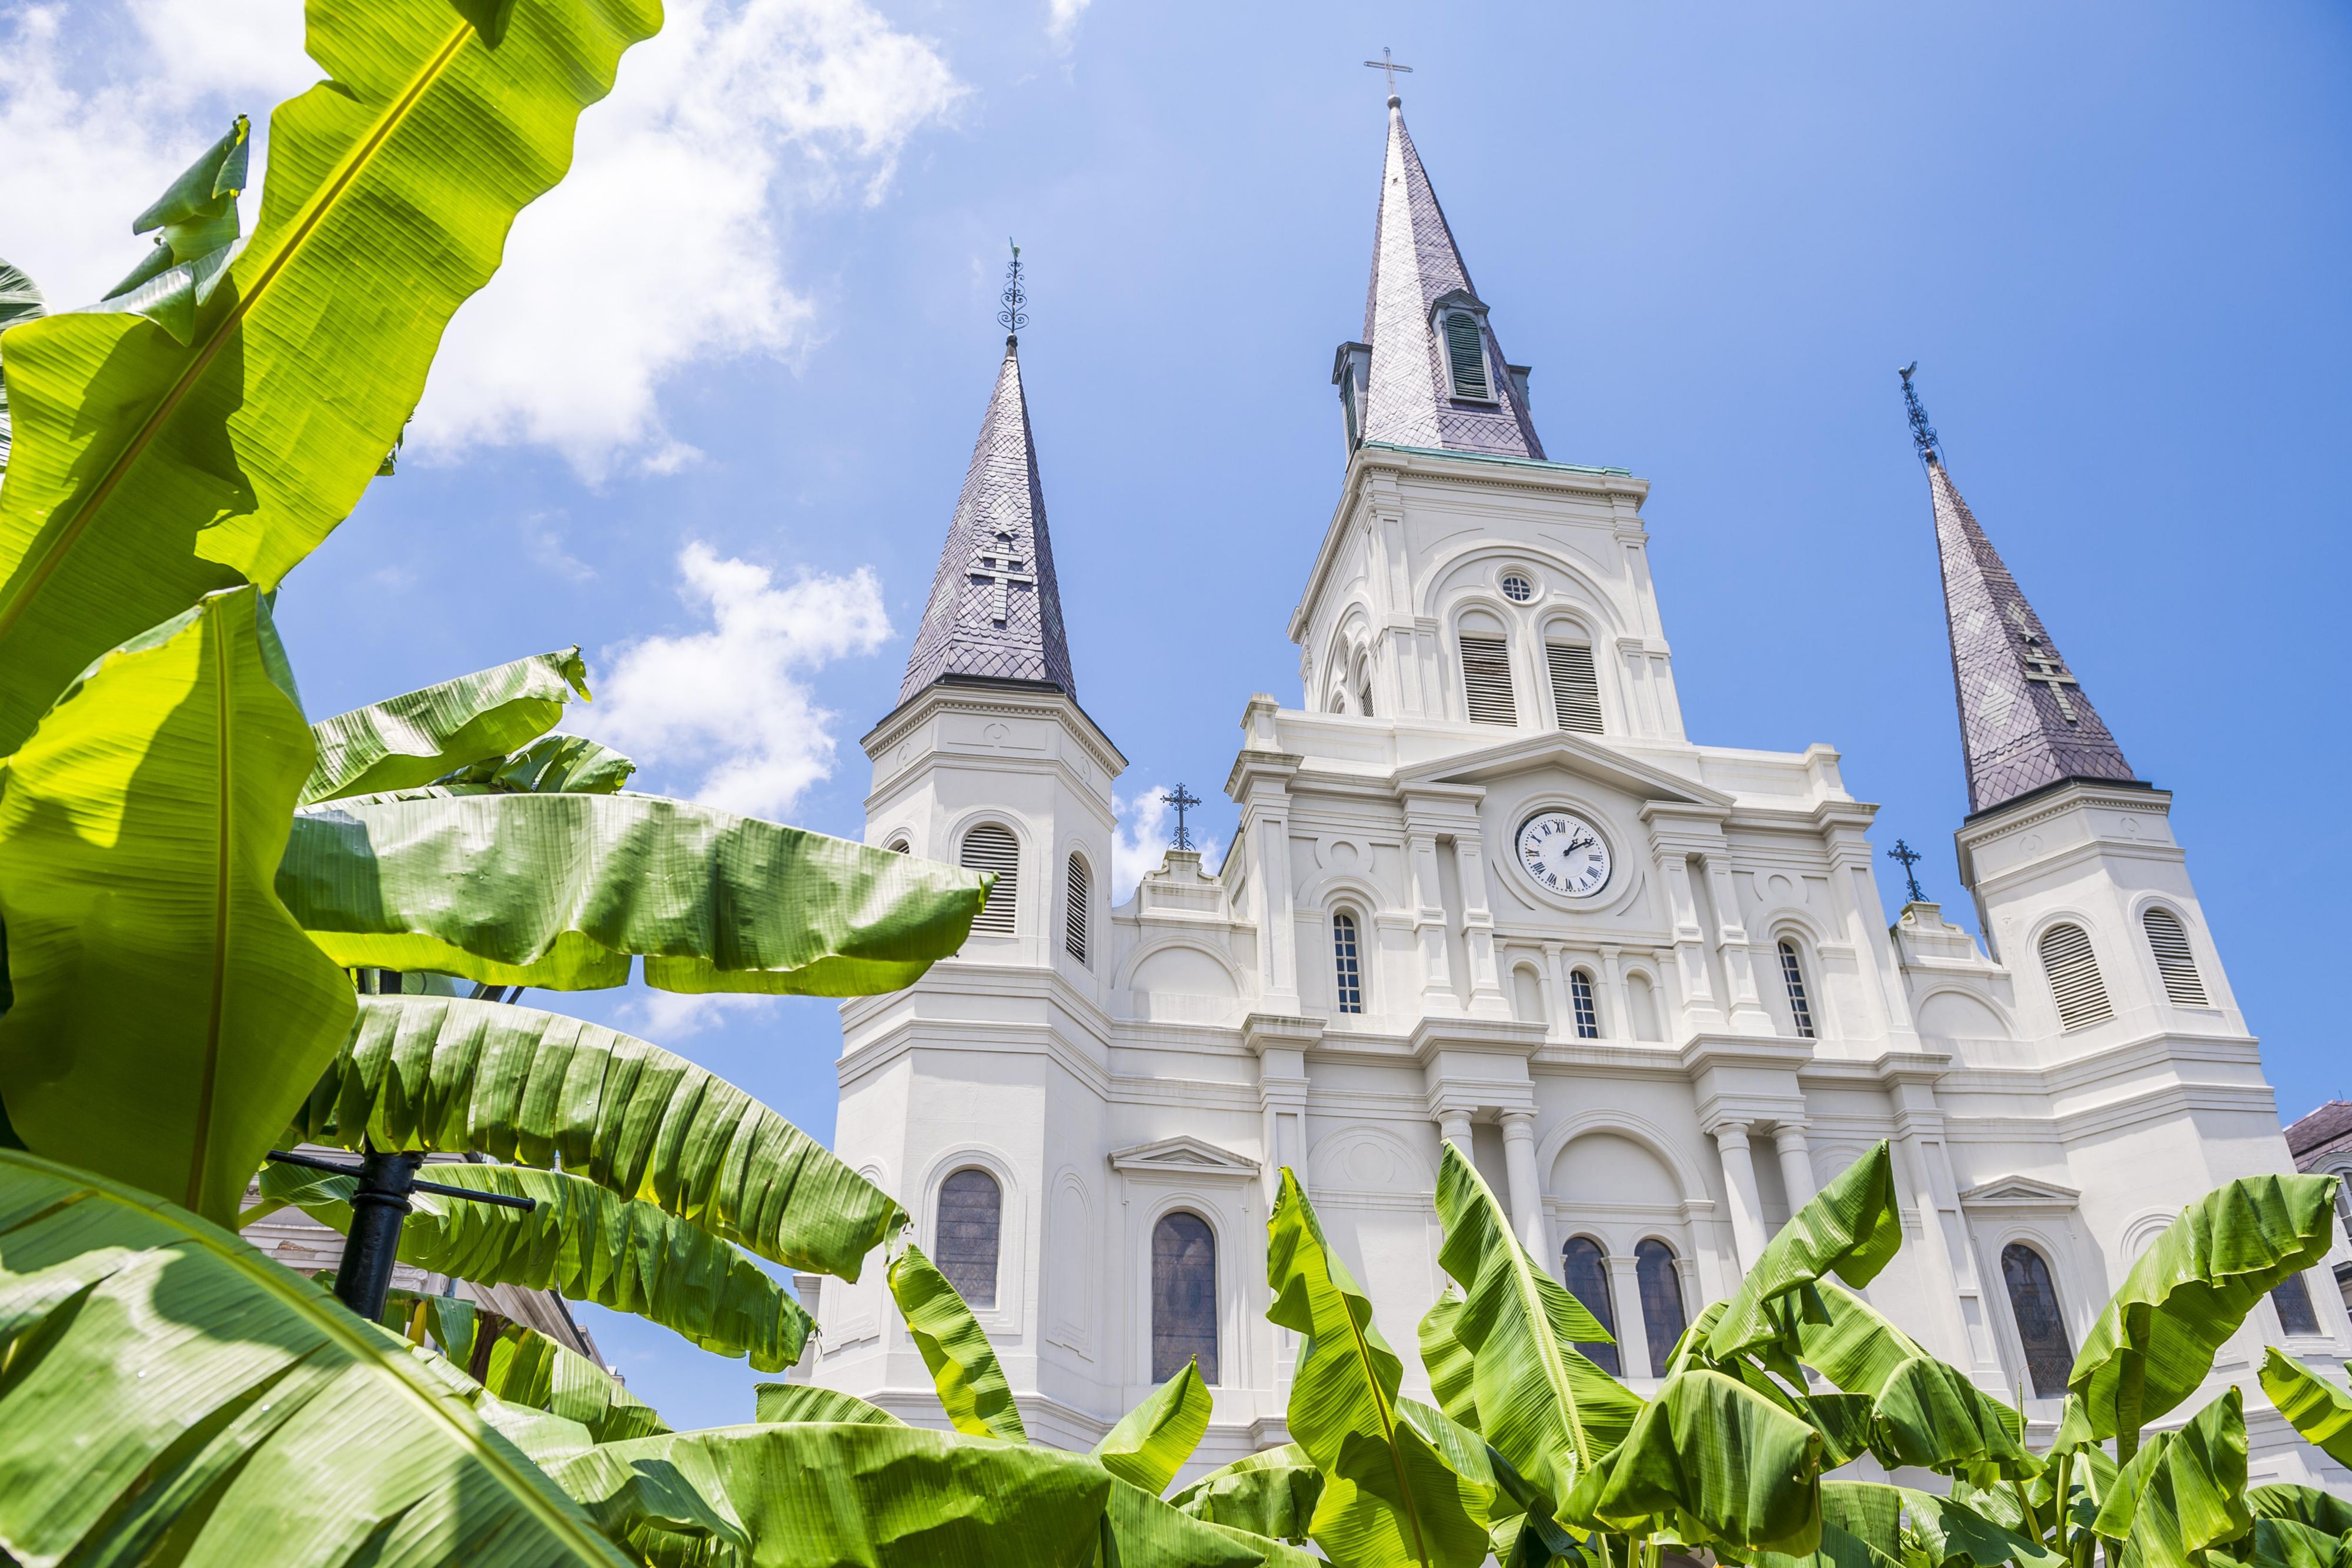 Whether you're in town to explore the French Quarter, enjoy one of our many festivals, or are here for work, our Central Business District location, adjacent to the Quarter, offers the perfect oasis for work or play.